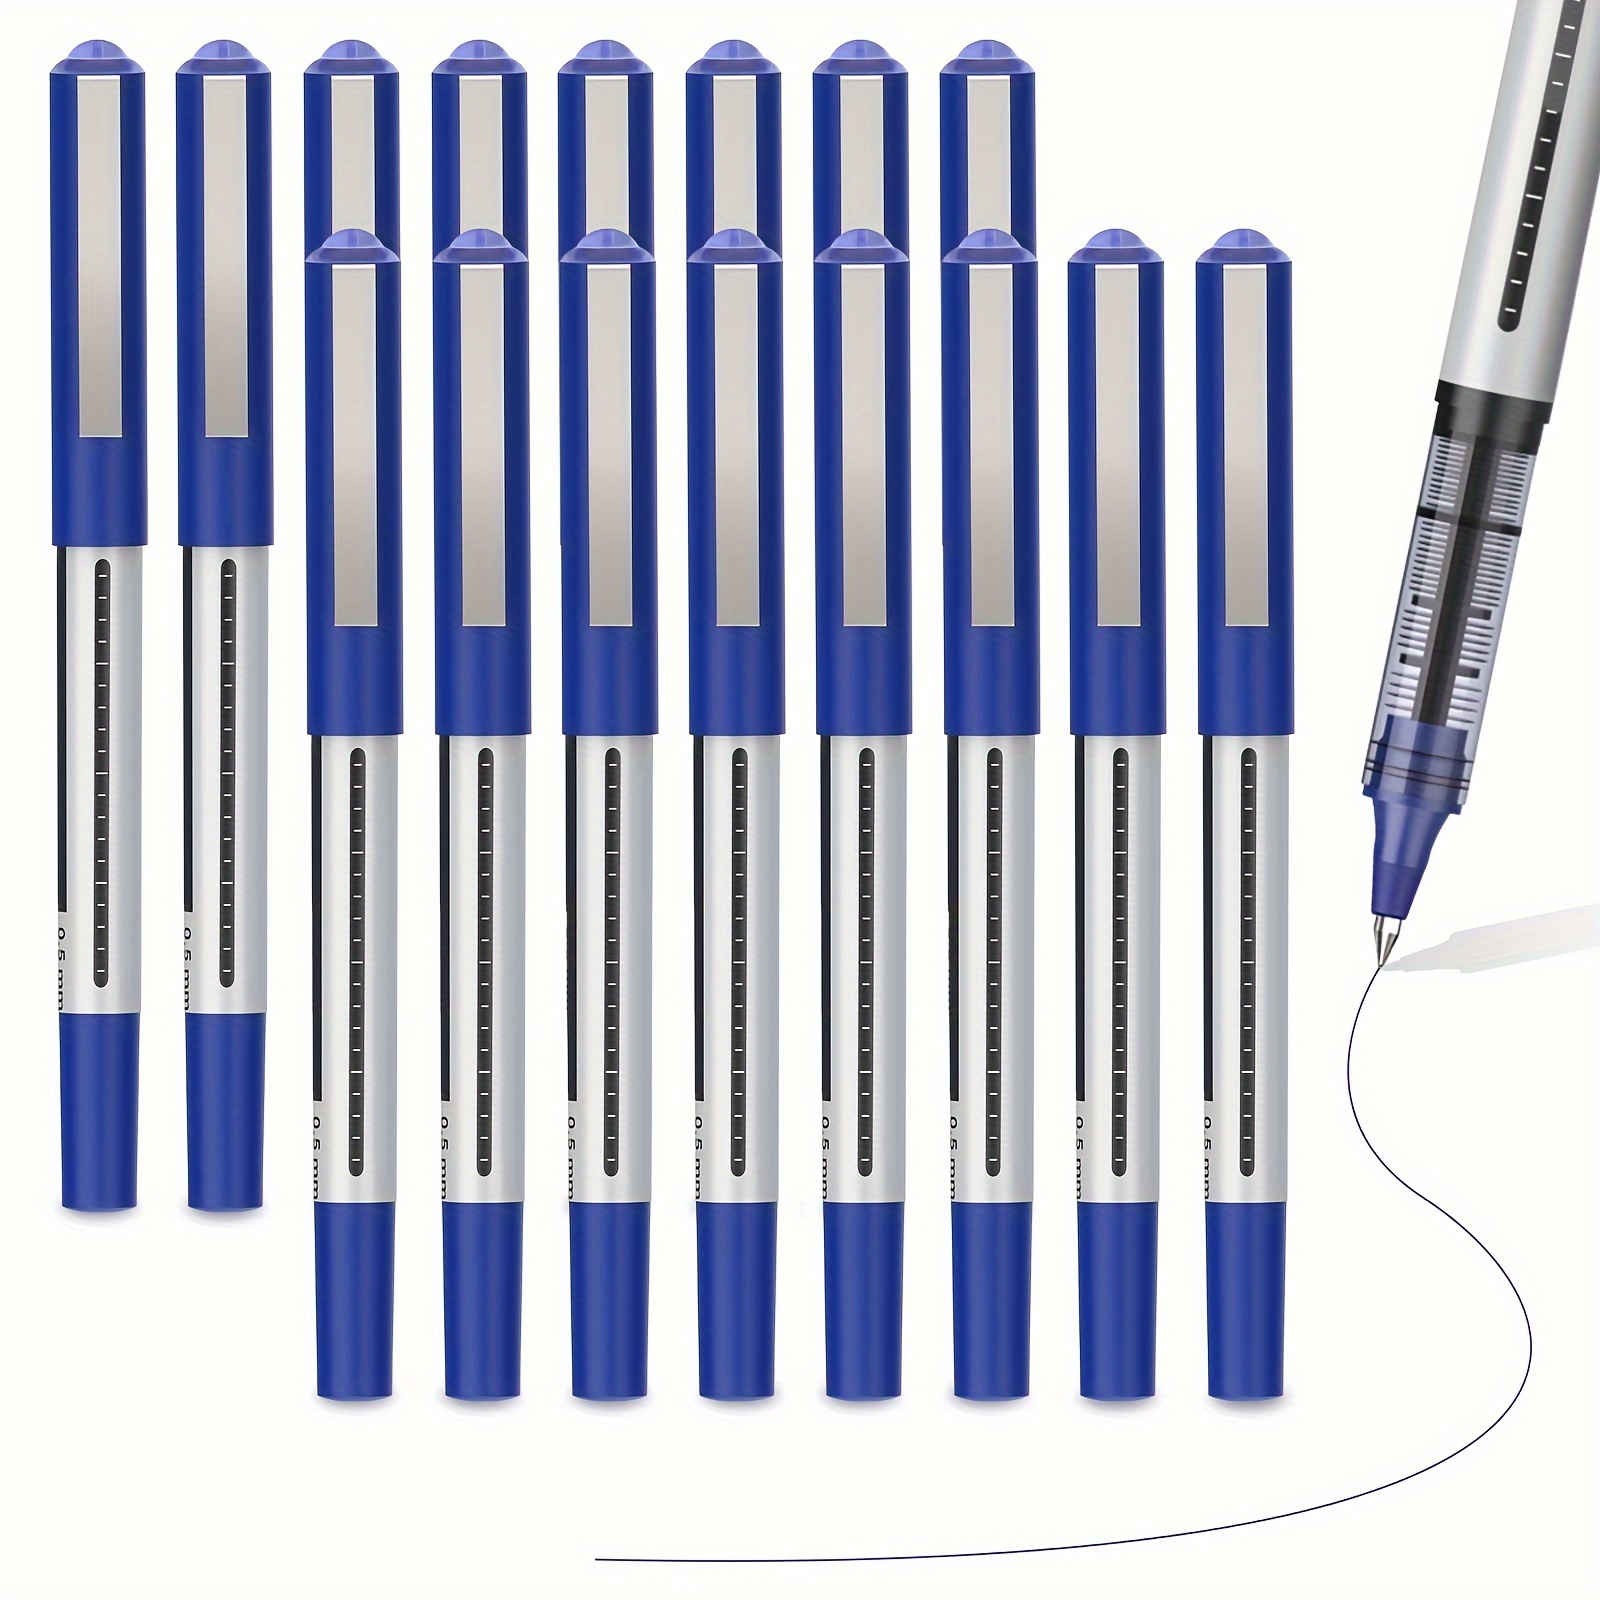 Rollerball Pen Fine Point Pens: 16 Pack 0.5mm Extra Thin Fine Tip